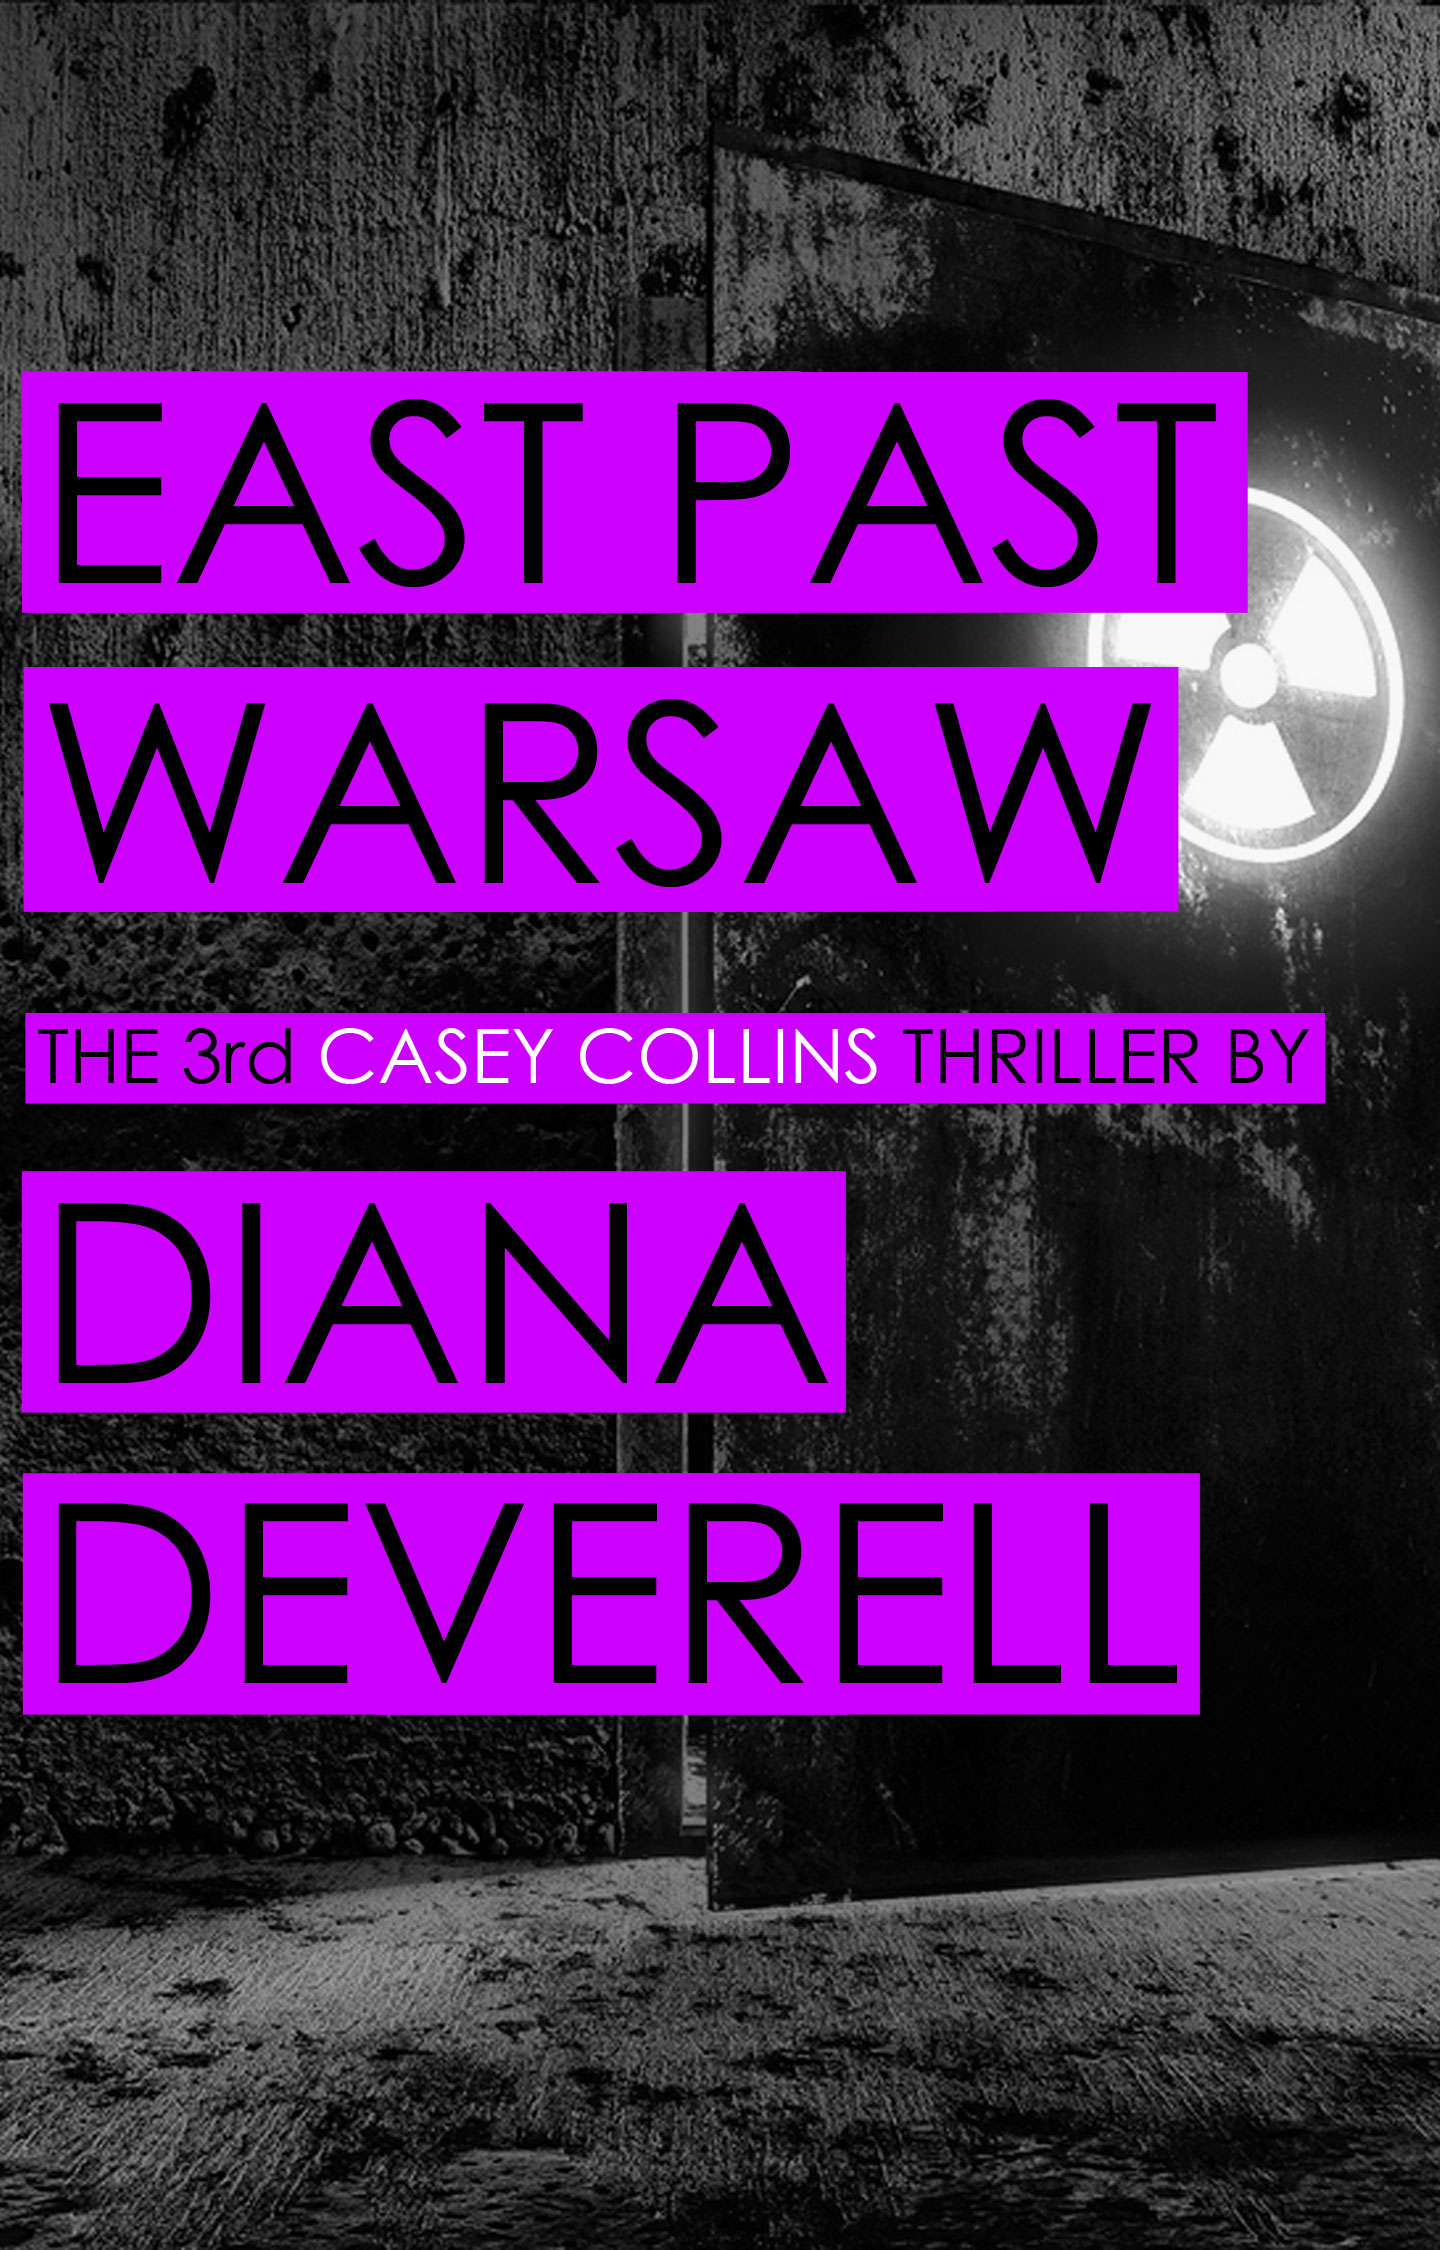 East Past Warsaw by Diana Deverell